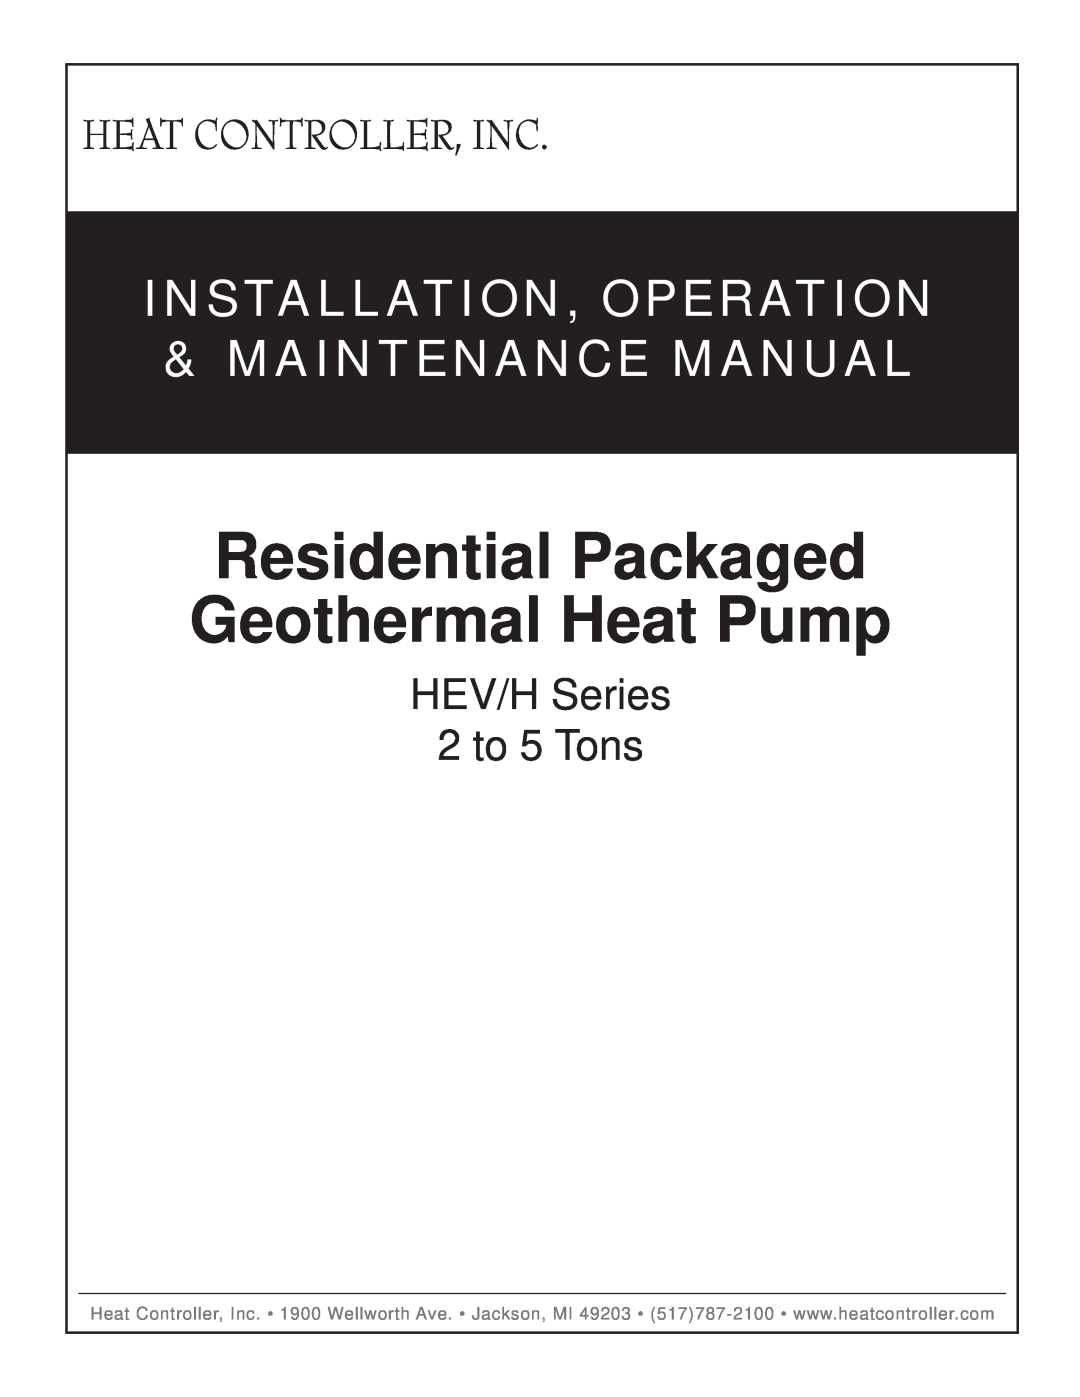 Heat Controller HEV/H manual Residential Packaged Geothermal Heat Pump, Installation, Operation & Maintenance Manual 